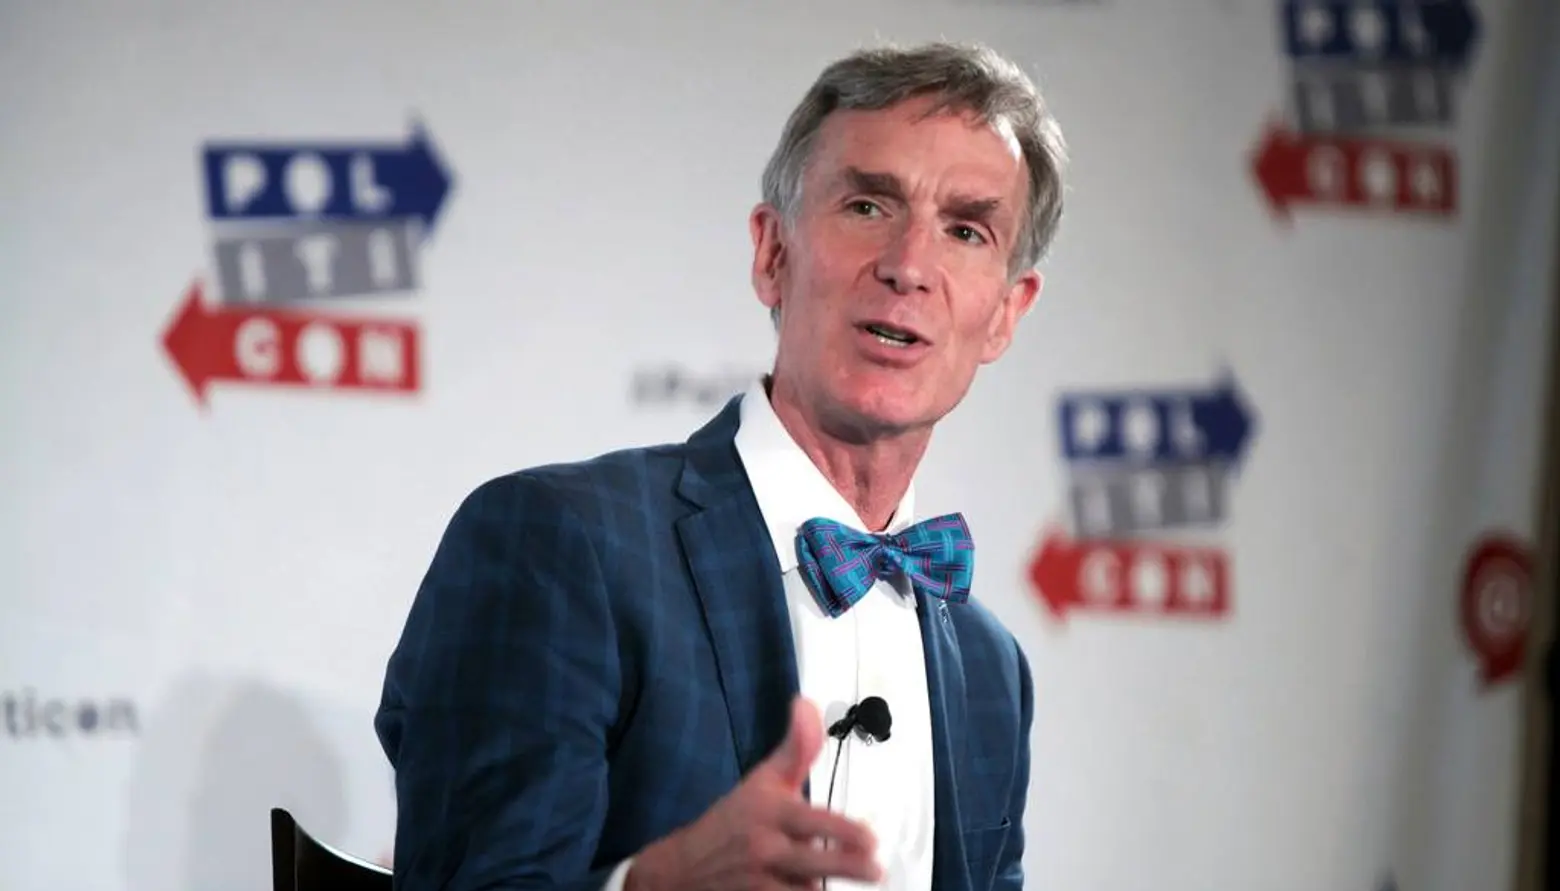 New Yorker Bill Nye on His Favorite National Park and Climate Change